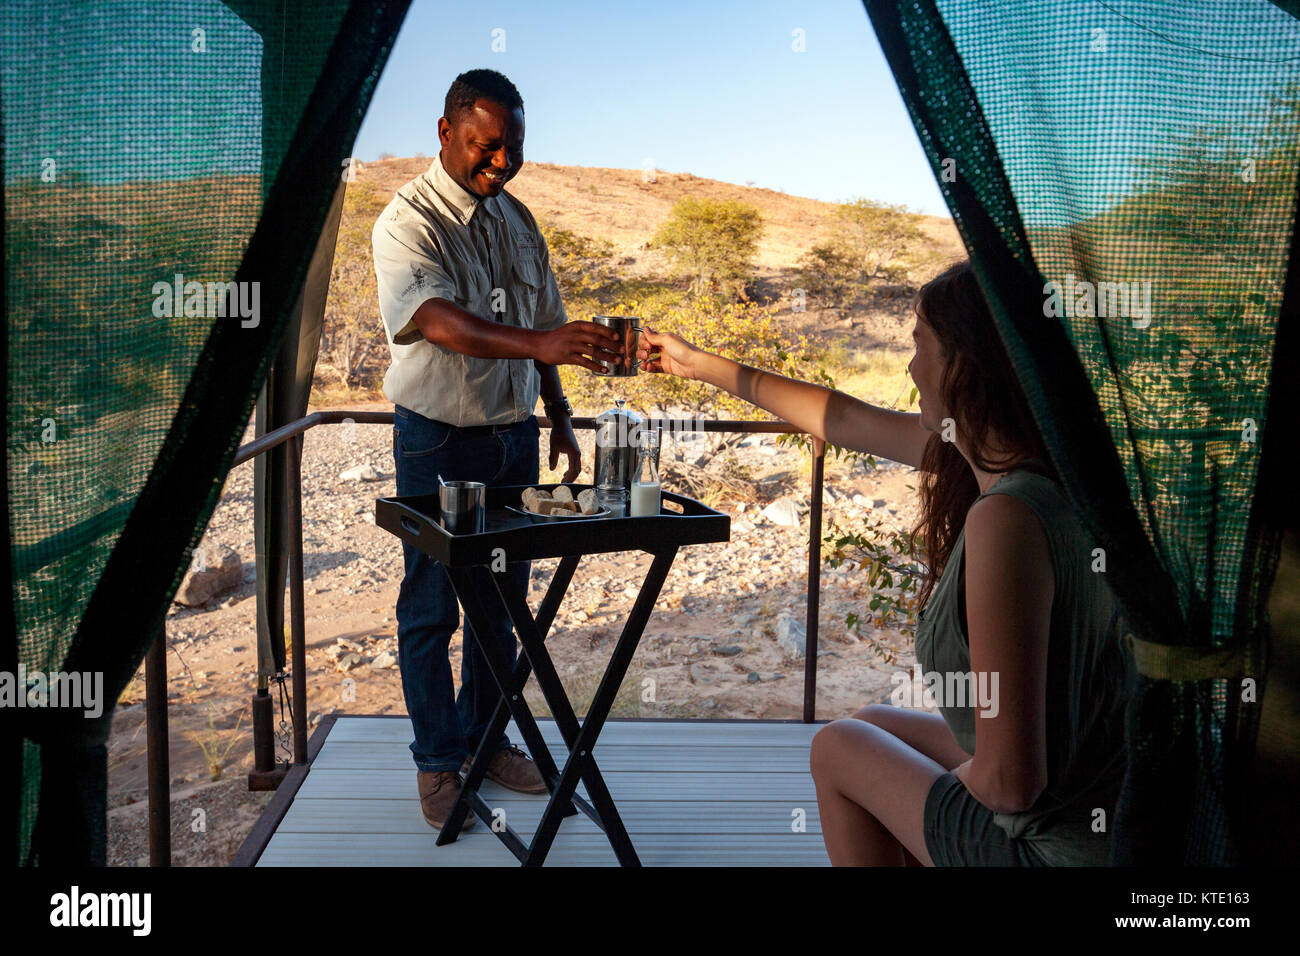 Staff person serving coffee at Huab Under Canvas, Damaraland, Namibia, Africa Stock Photo